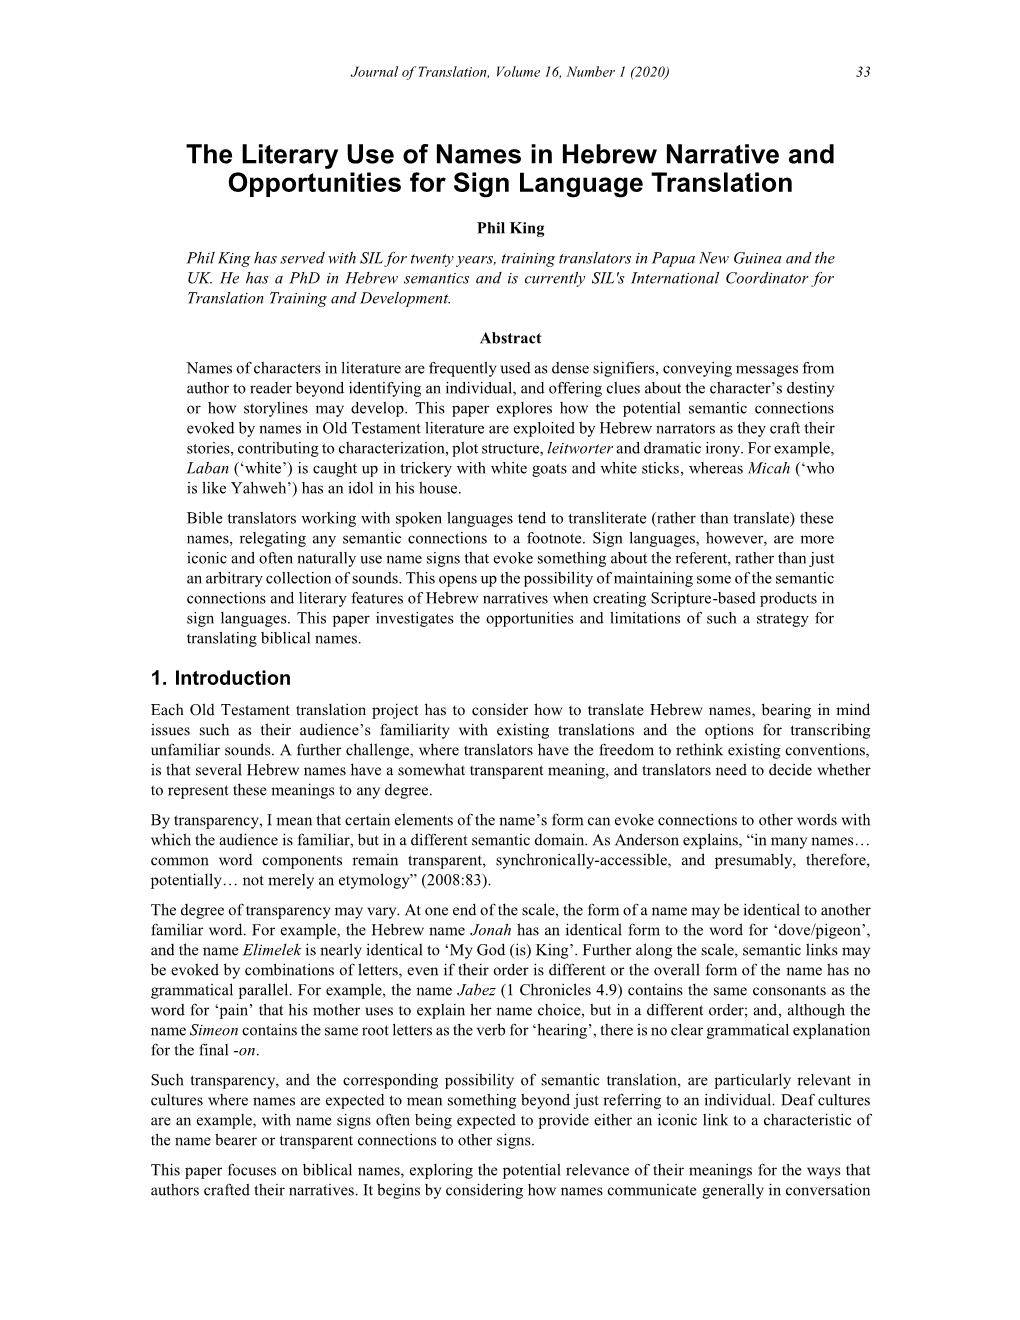 The Literary Use of Names in Hebrew Narrative and Opportunities for Sign Language Translation